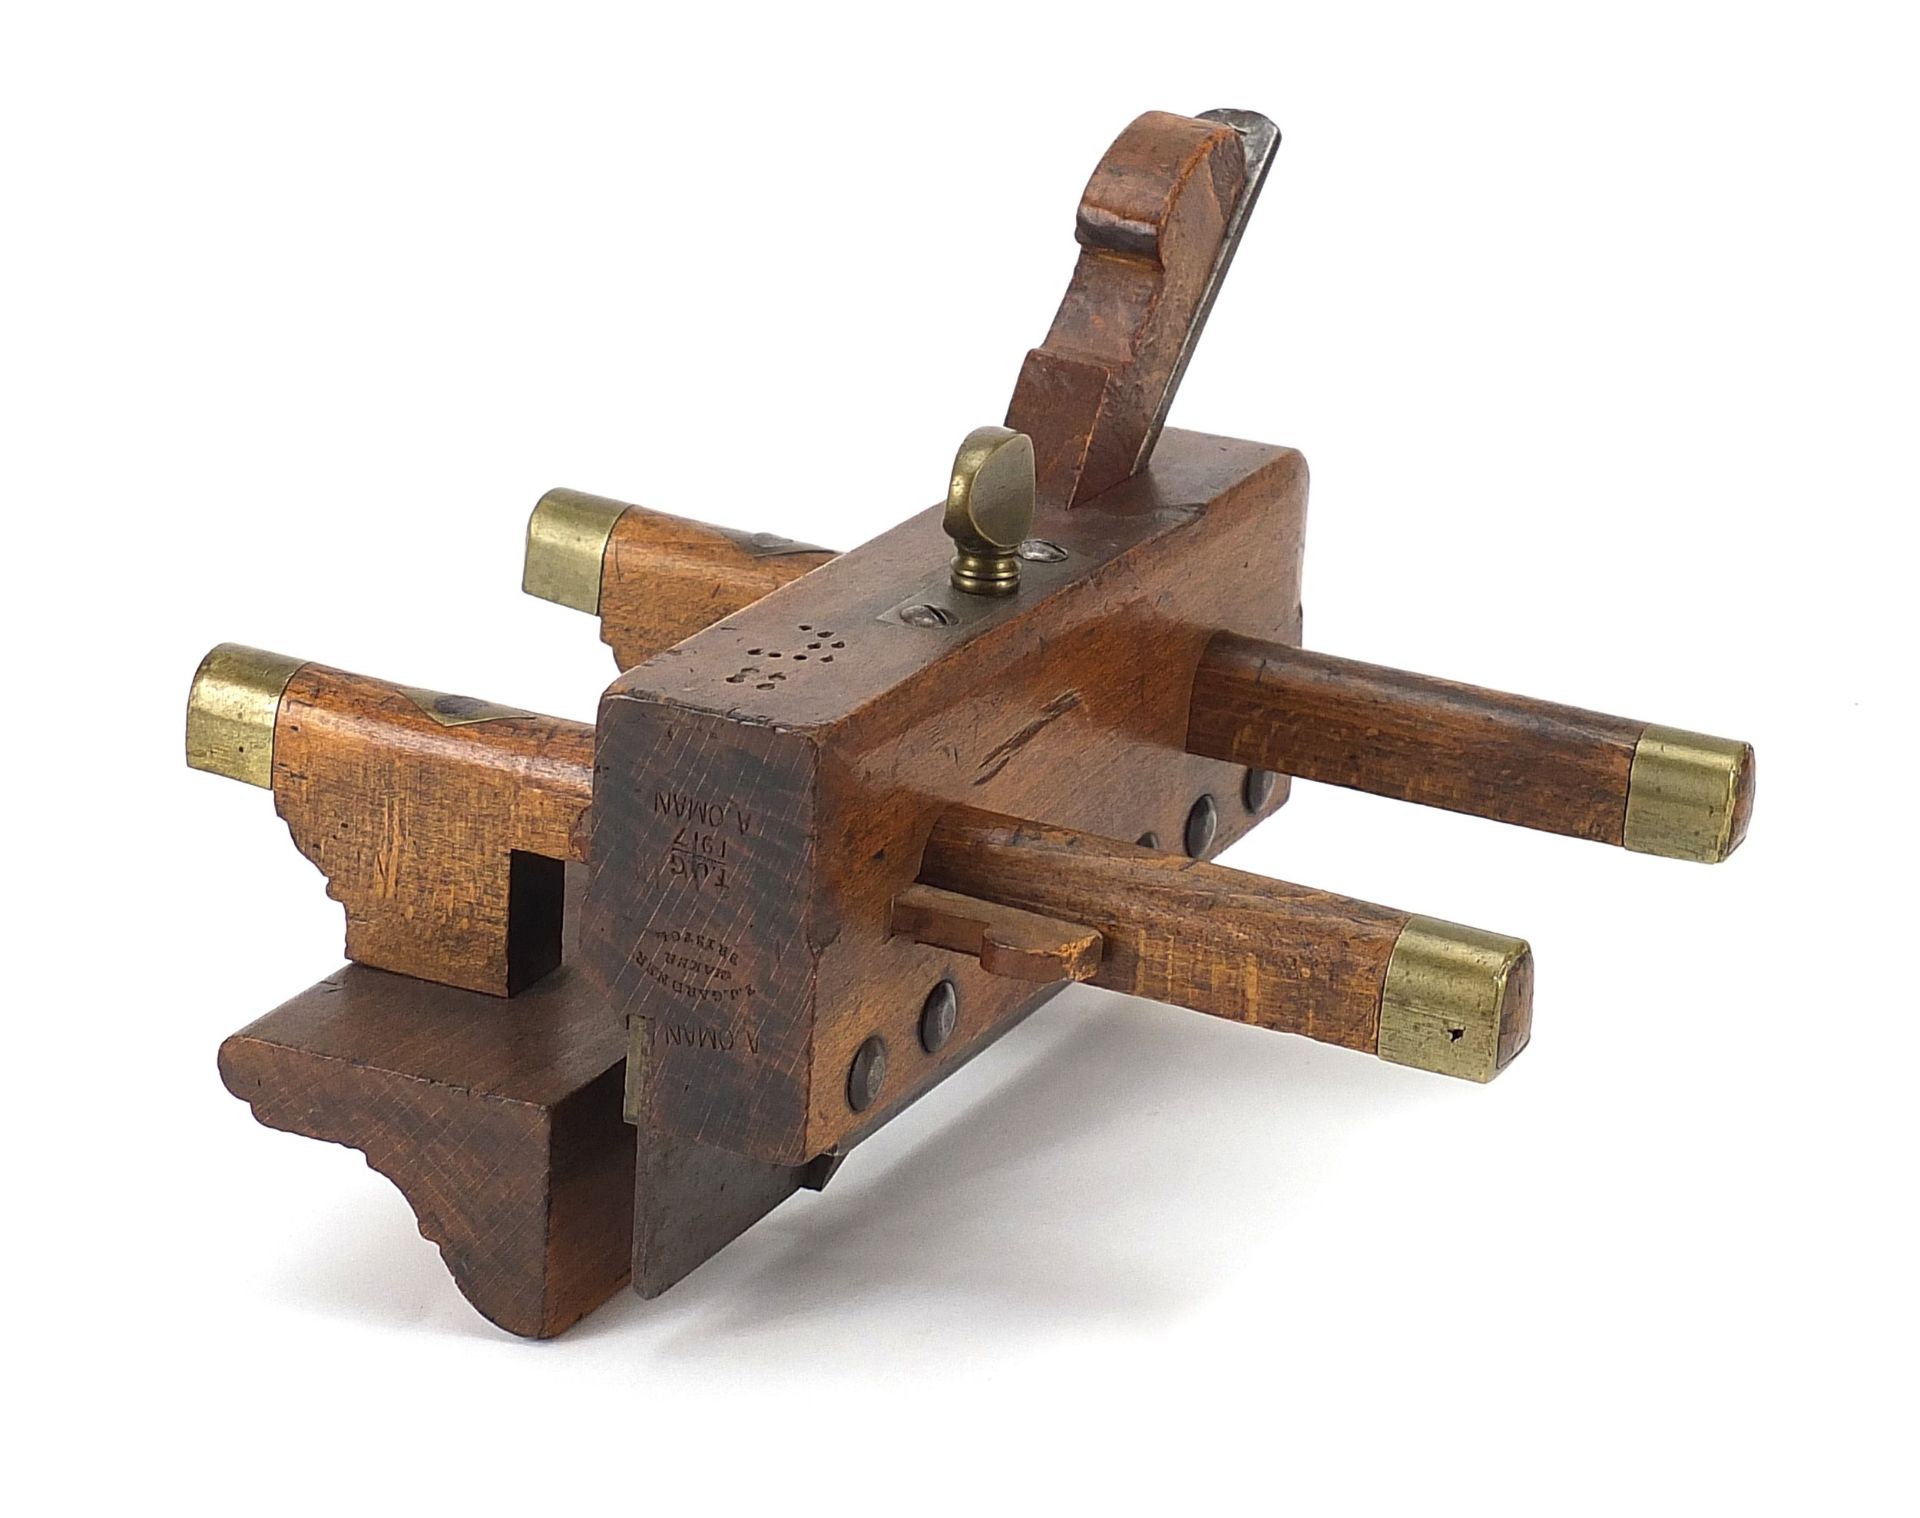 Early 20th century military interest plough plane by T Gardner, dated 1917, 23 in length